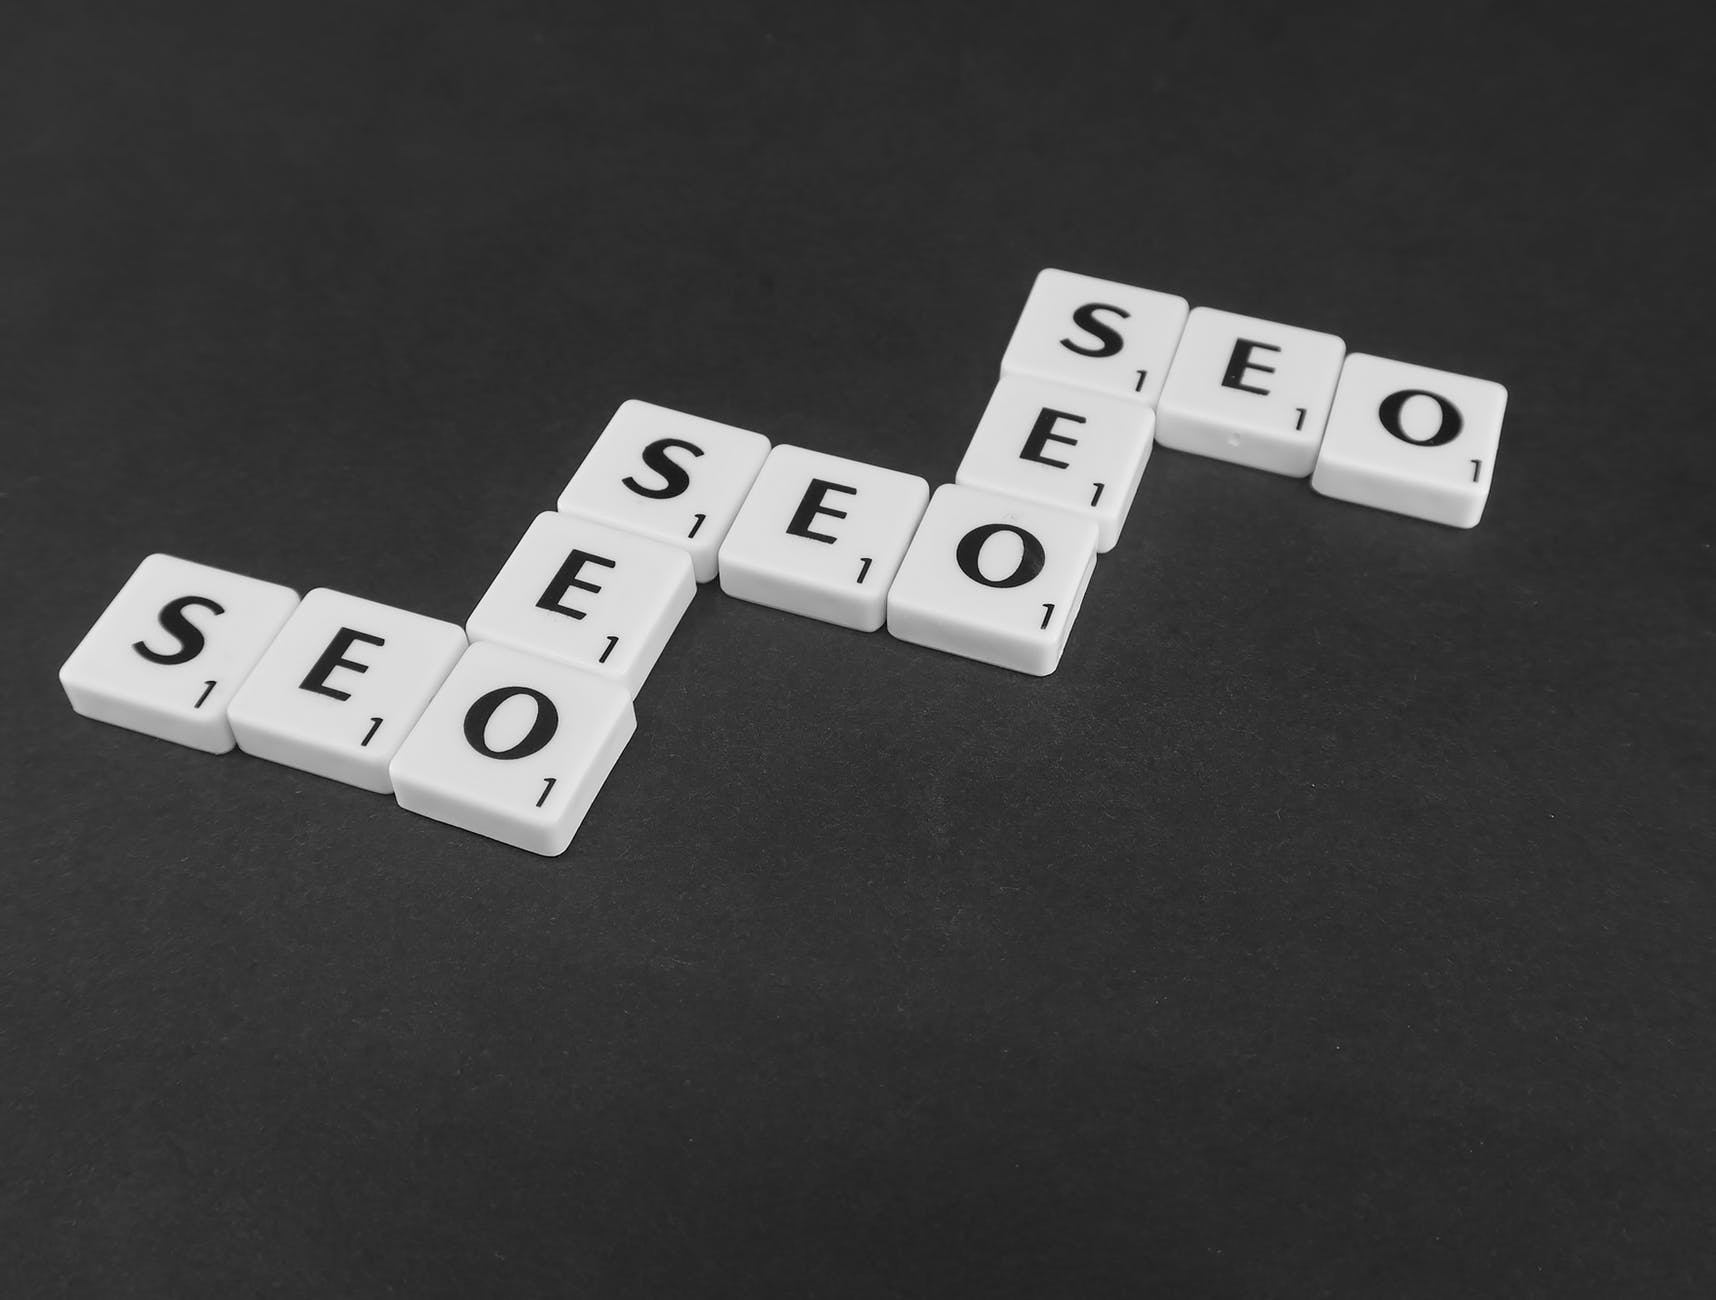 Debunking the Most Common SEO Myths That Exist Today